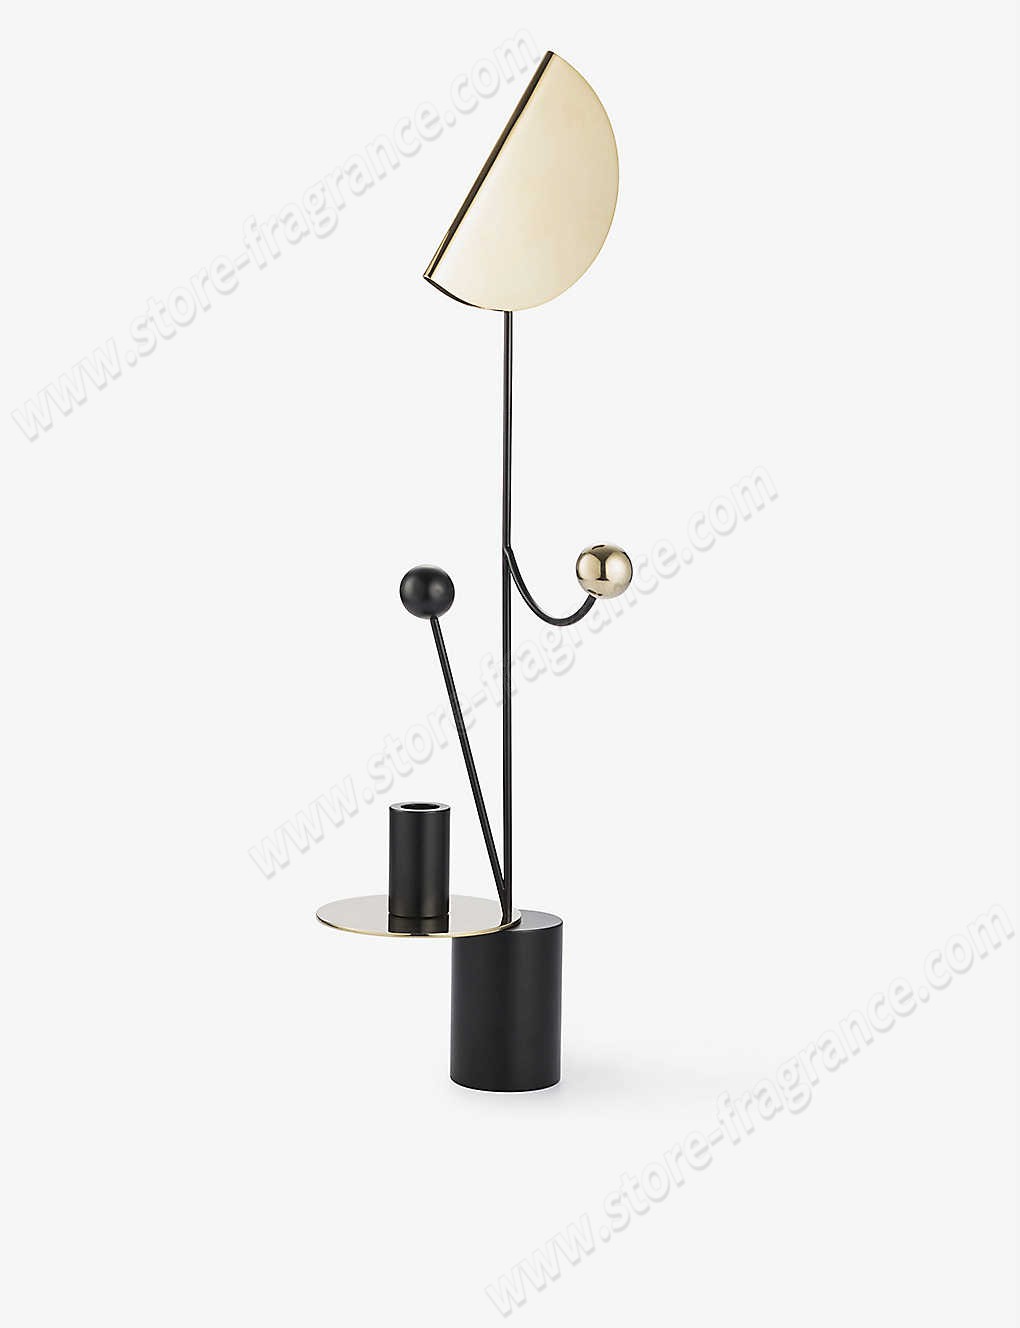 MAISON DADA/Les Immobiles N°2 powder-coated metal candle holder 60cm ✿ Discount Store - MAISON DADA/Les Immobiles N°2 powder-coated metal candle holder 60cm ✿ Discount Store